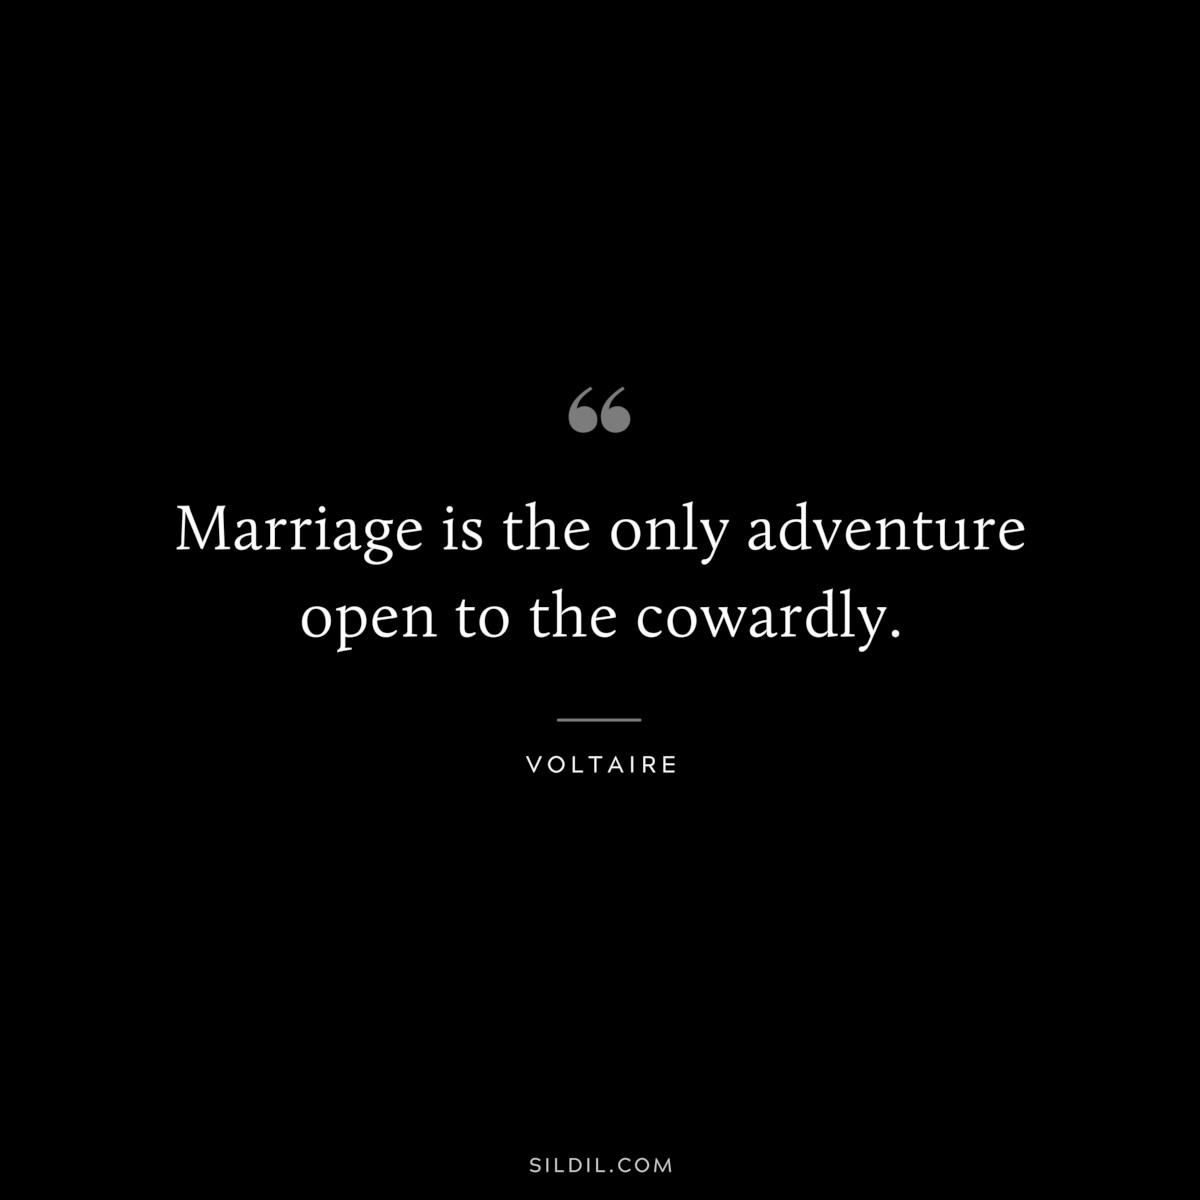 Marriage is the only adventure open to the cowardly. ― Voltaire